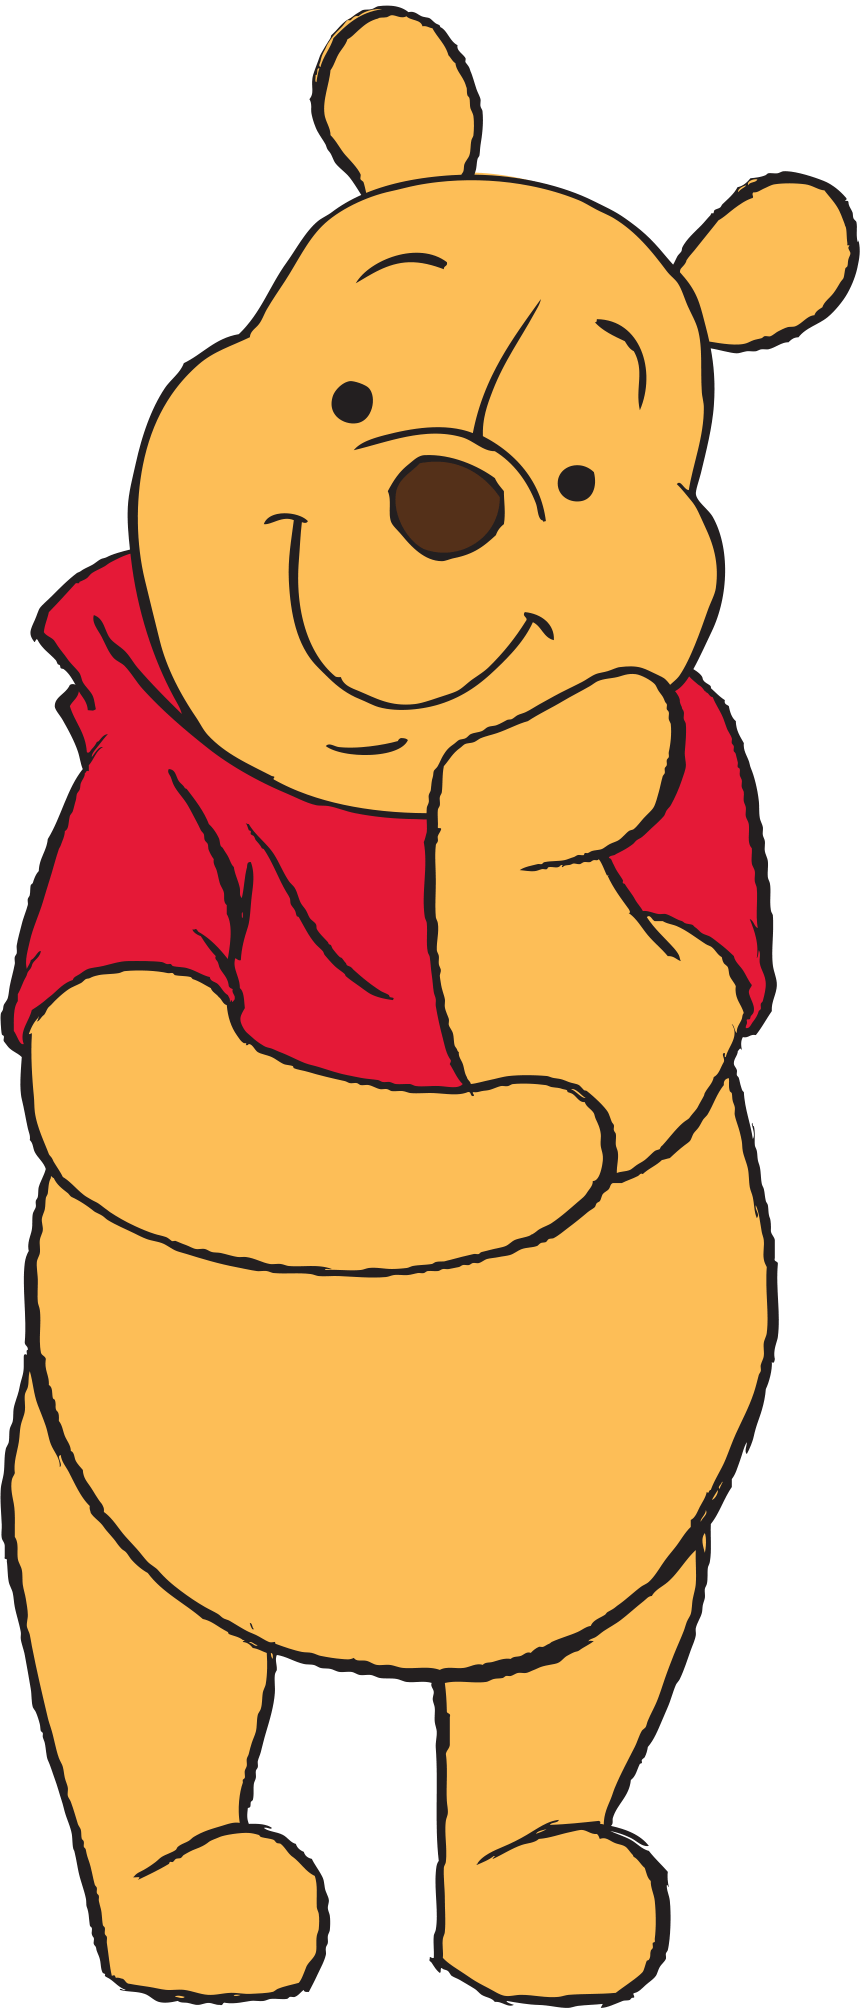 Classic Winnie The Pooh PNG Image